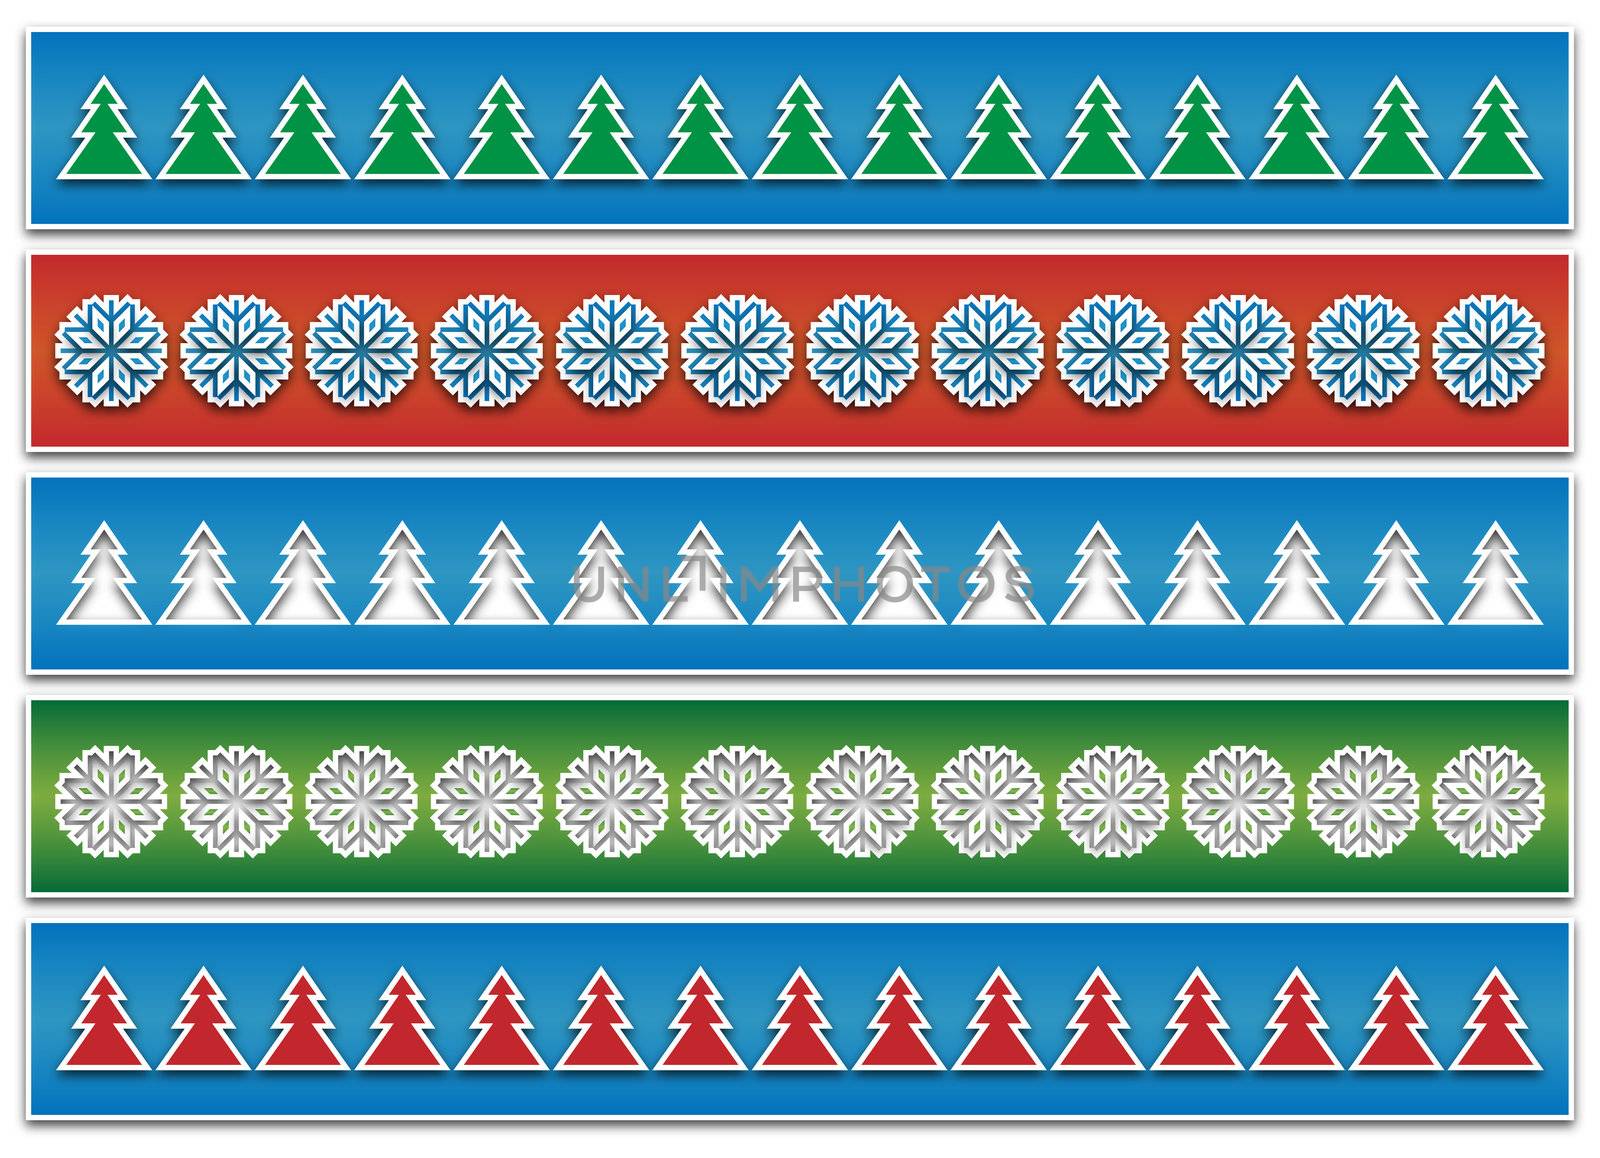 Christmas abstract background with colored slips adorned with trees and snowflakes